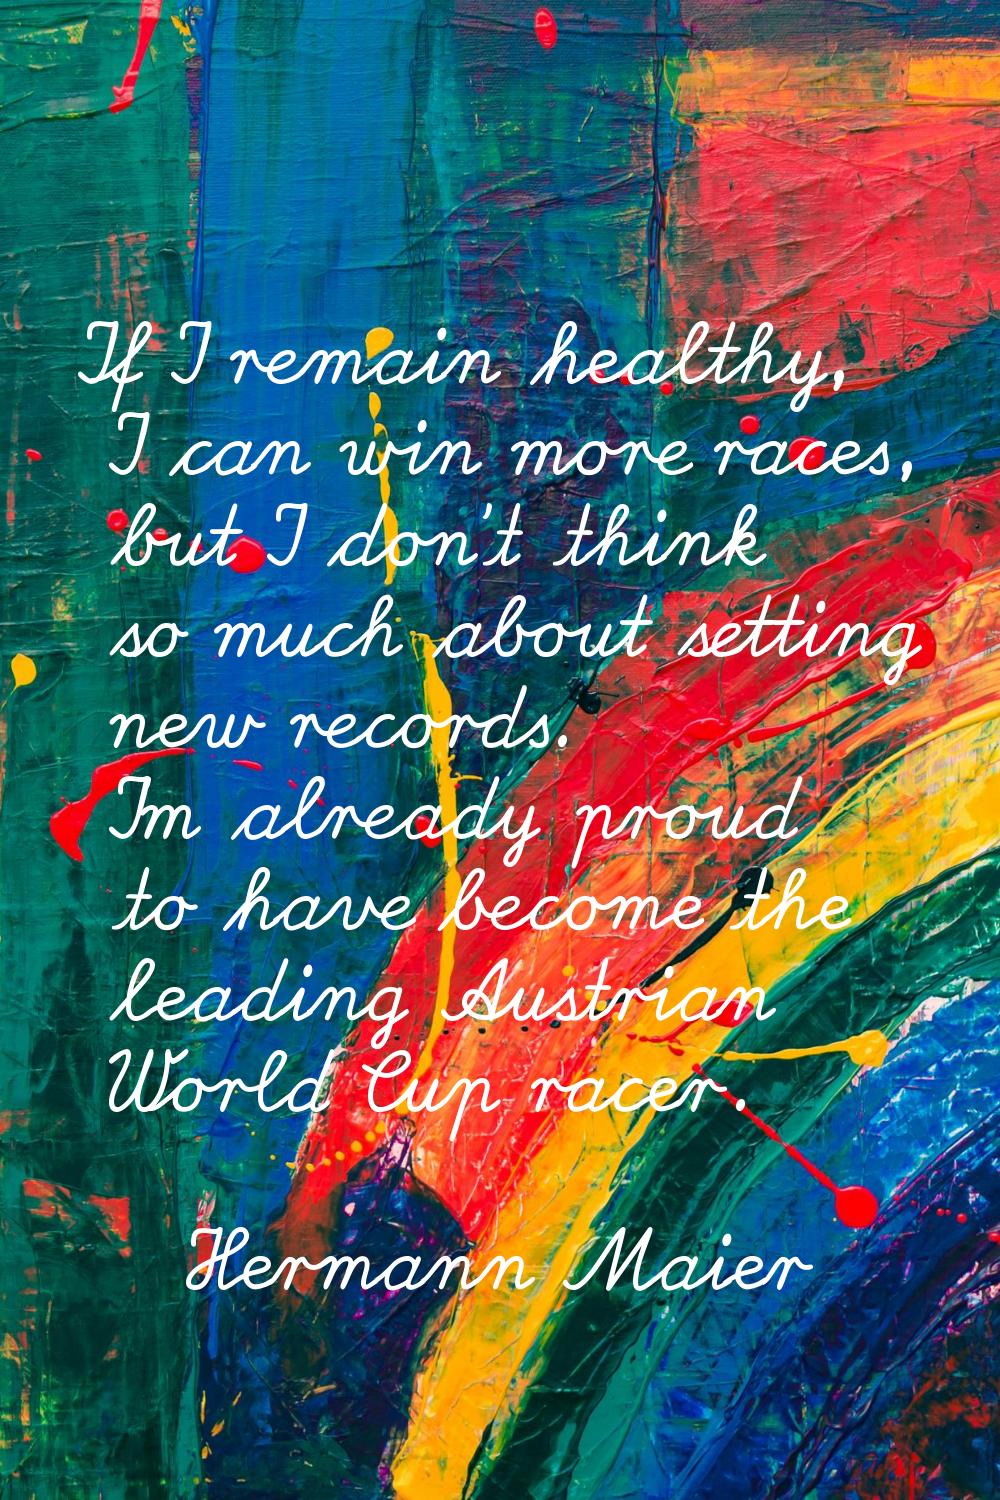 If I remain healthy, I can win more races, but I don't think so much about setting new records. I'm